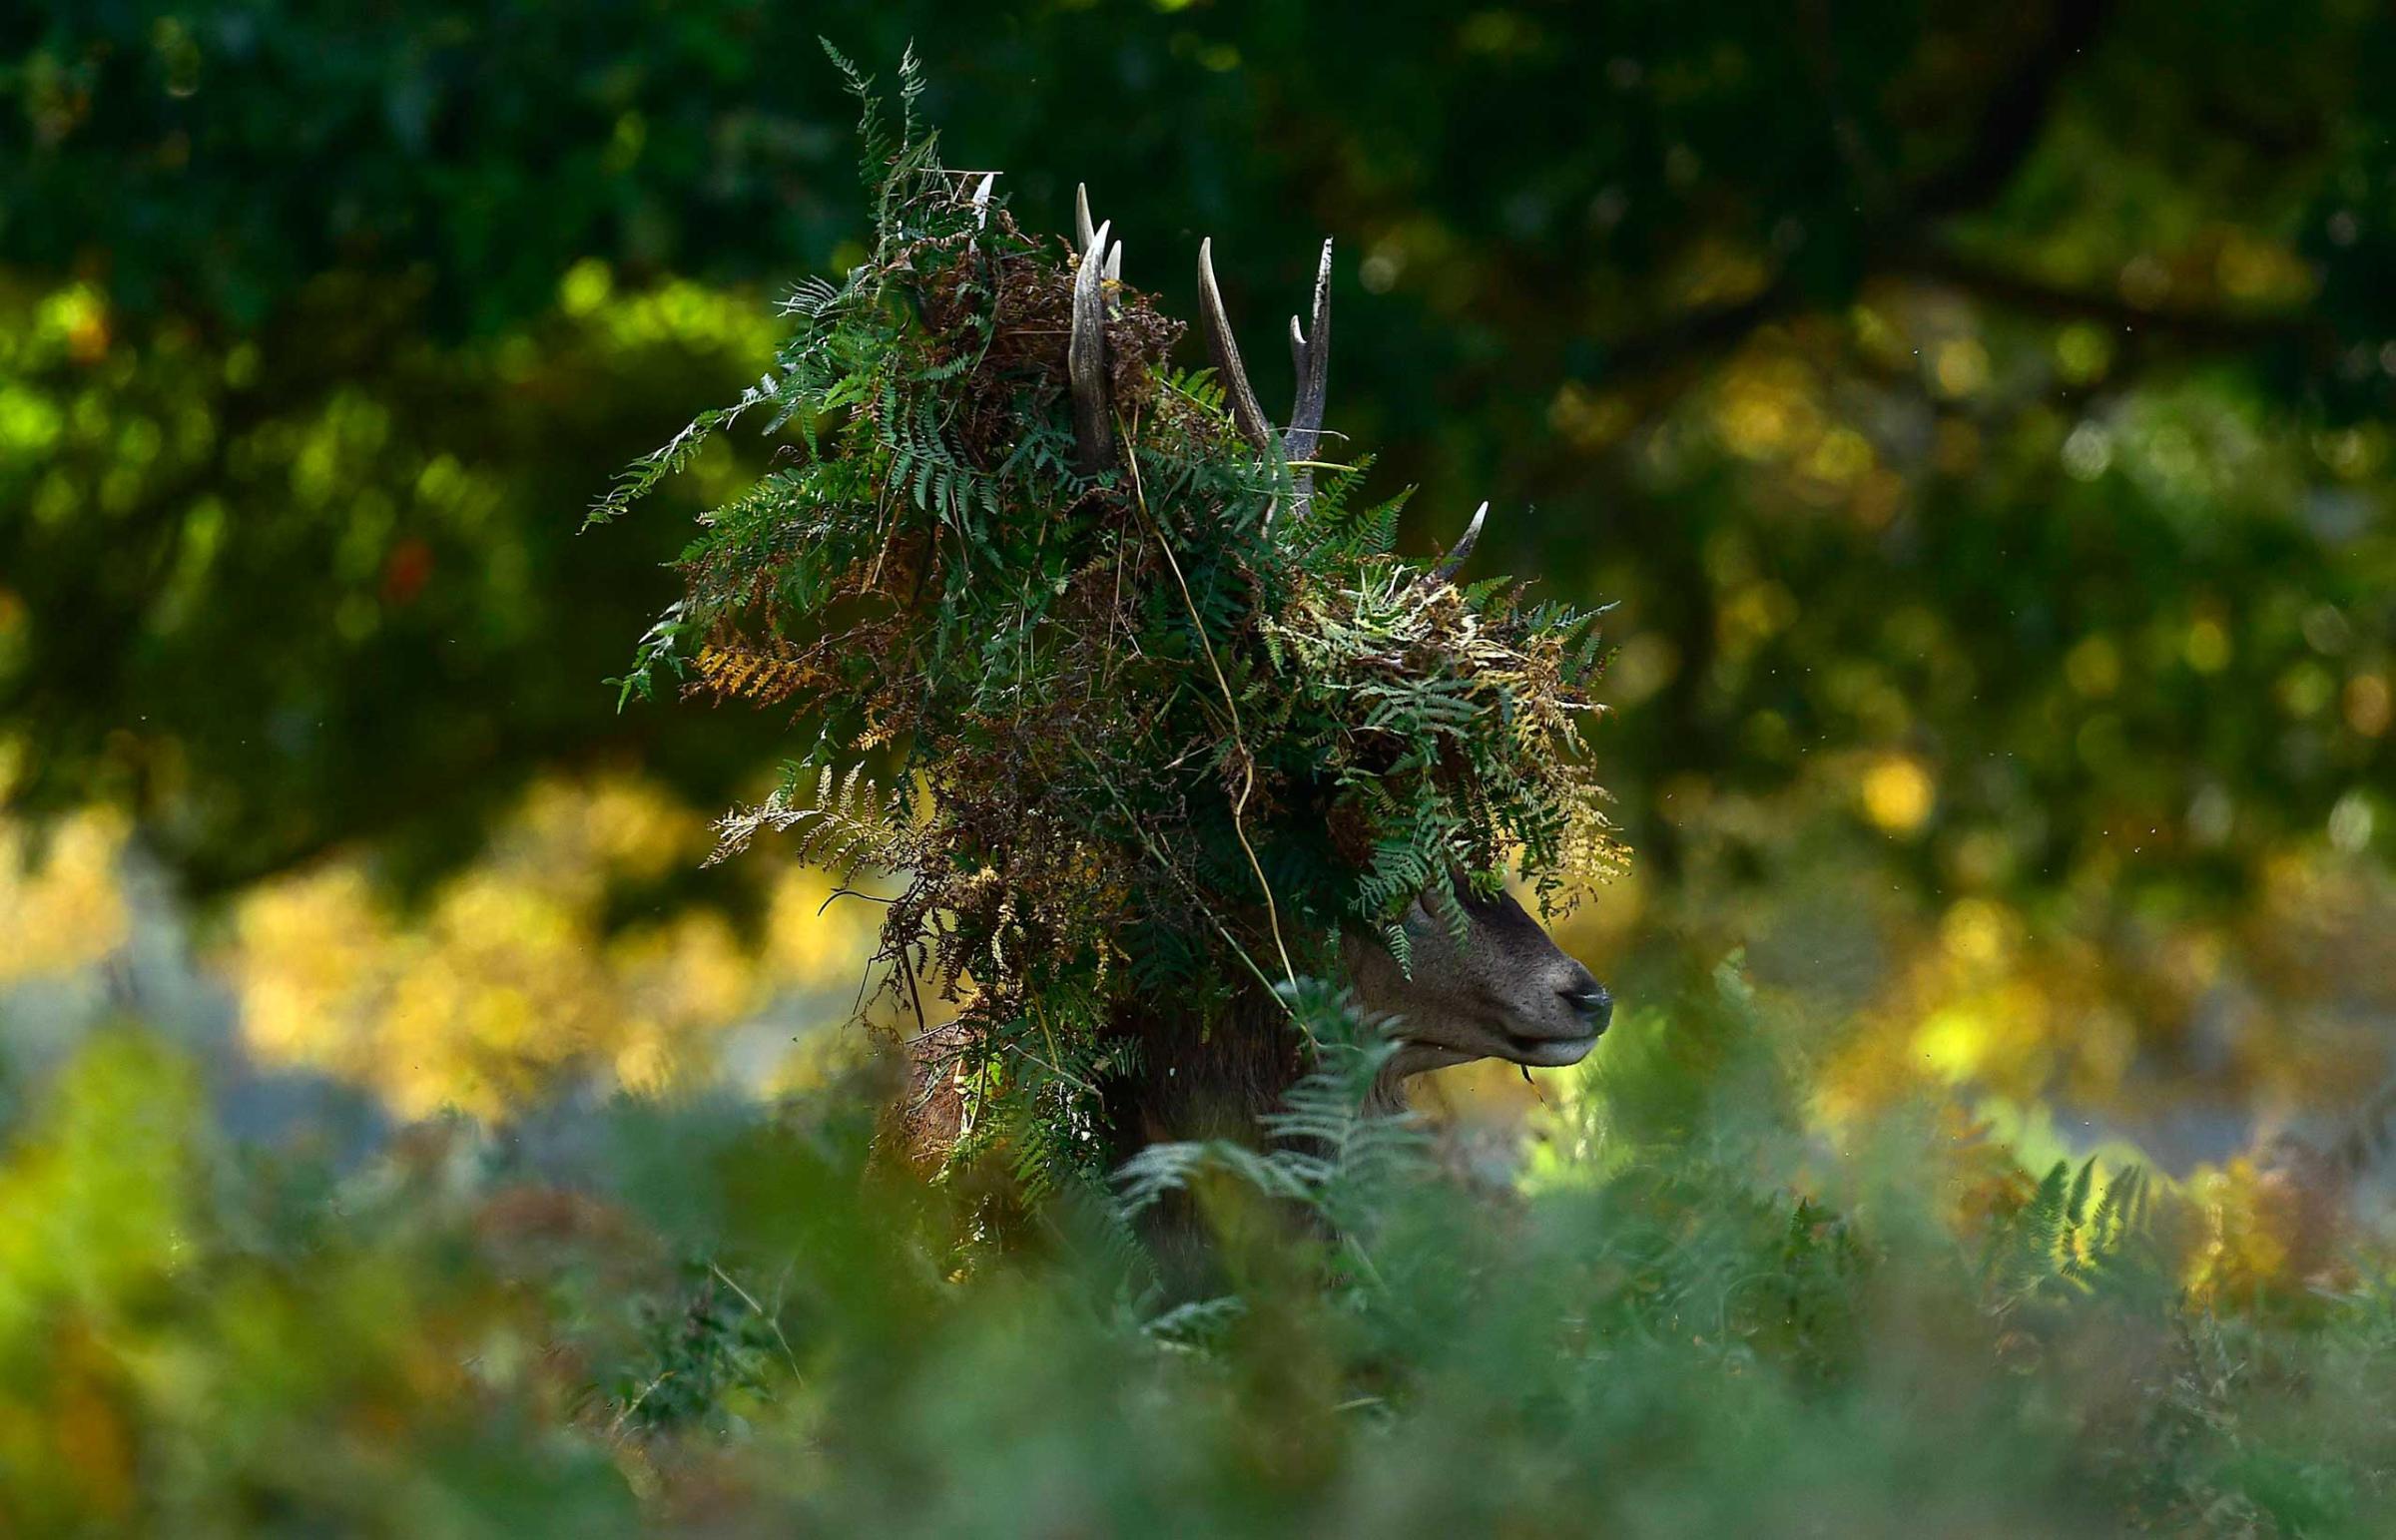 A male red deer with antlers covered in bracken, walks through undergrowth in Richmond Park, London, Oct. 3, 2014.